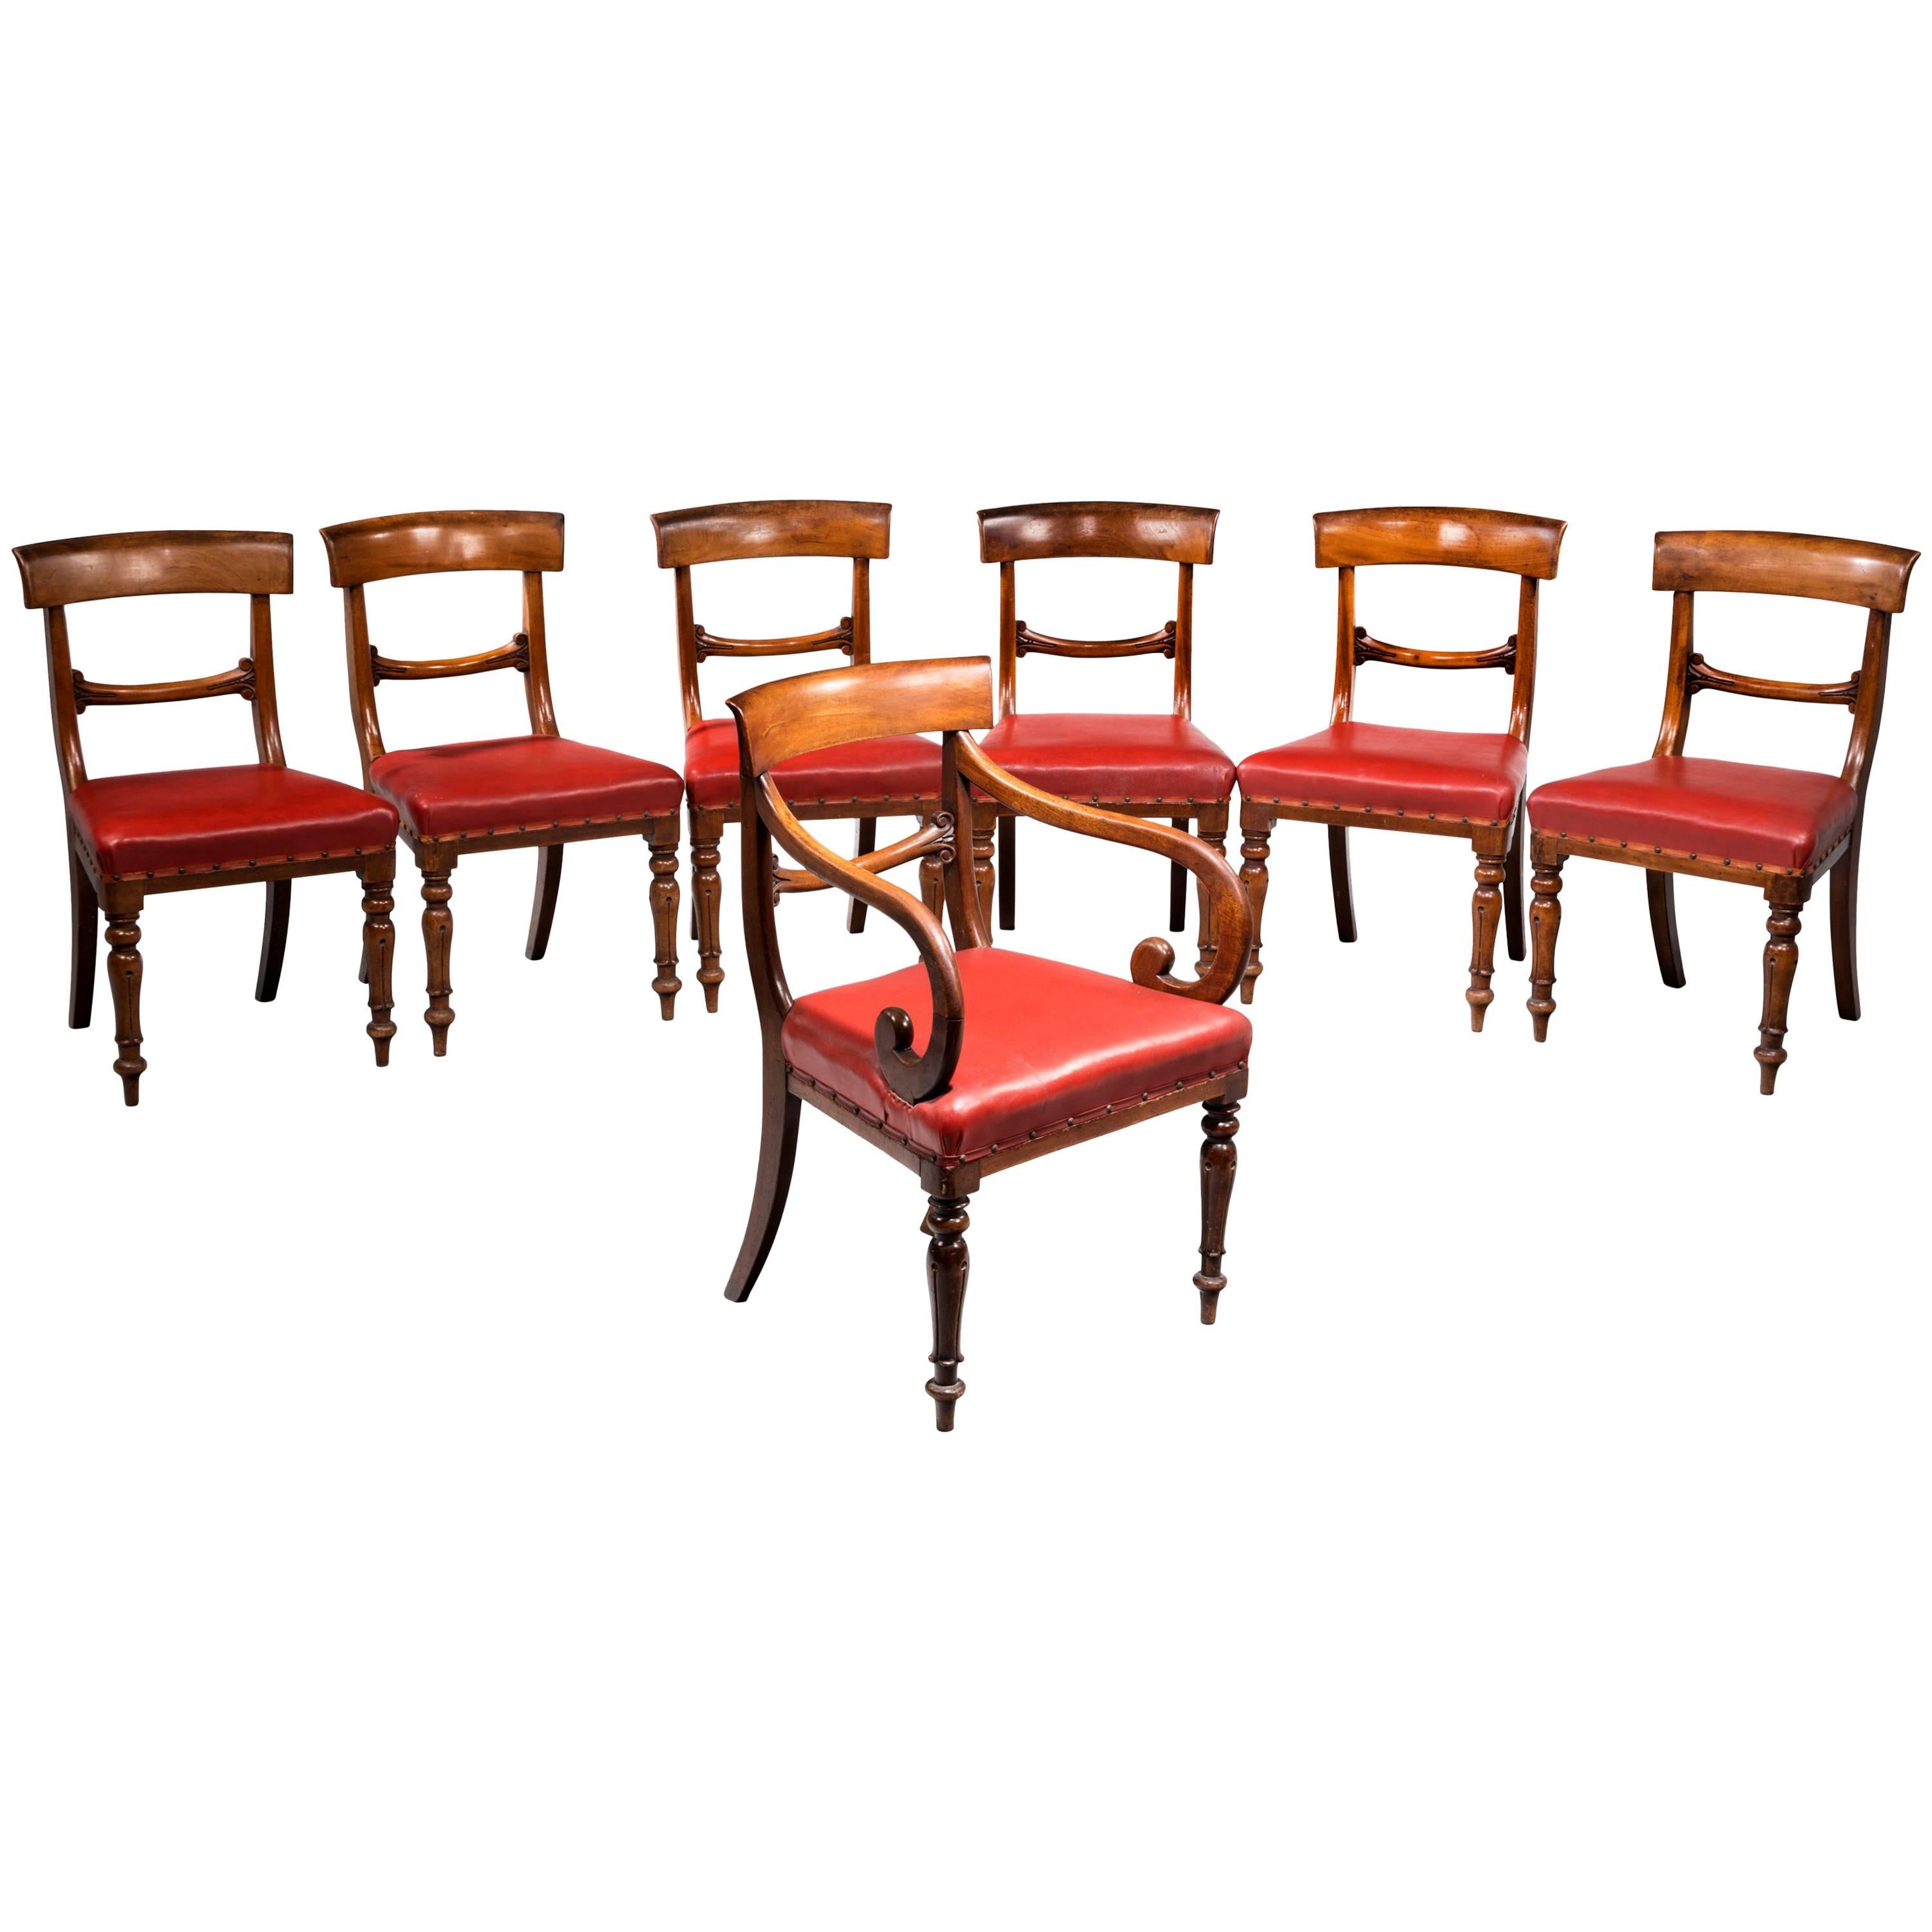 Set of Seven Early Victorian Mahogany Dining Chairs